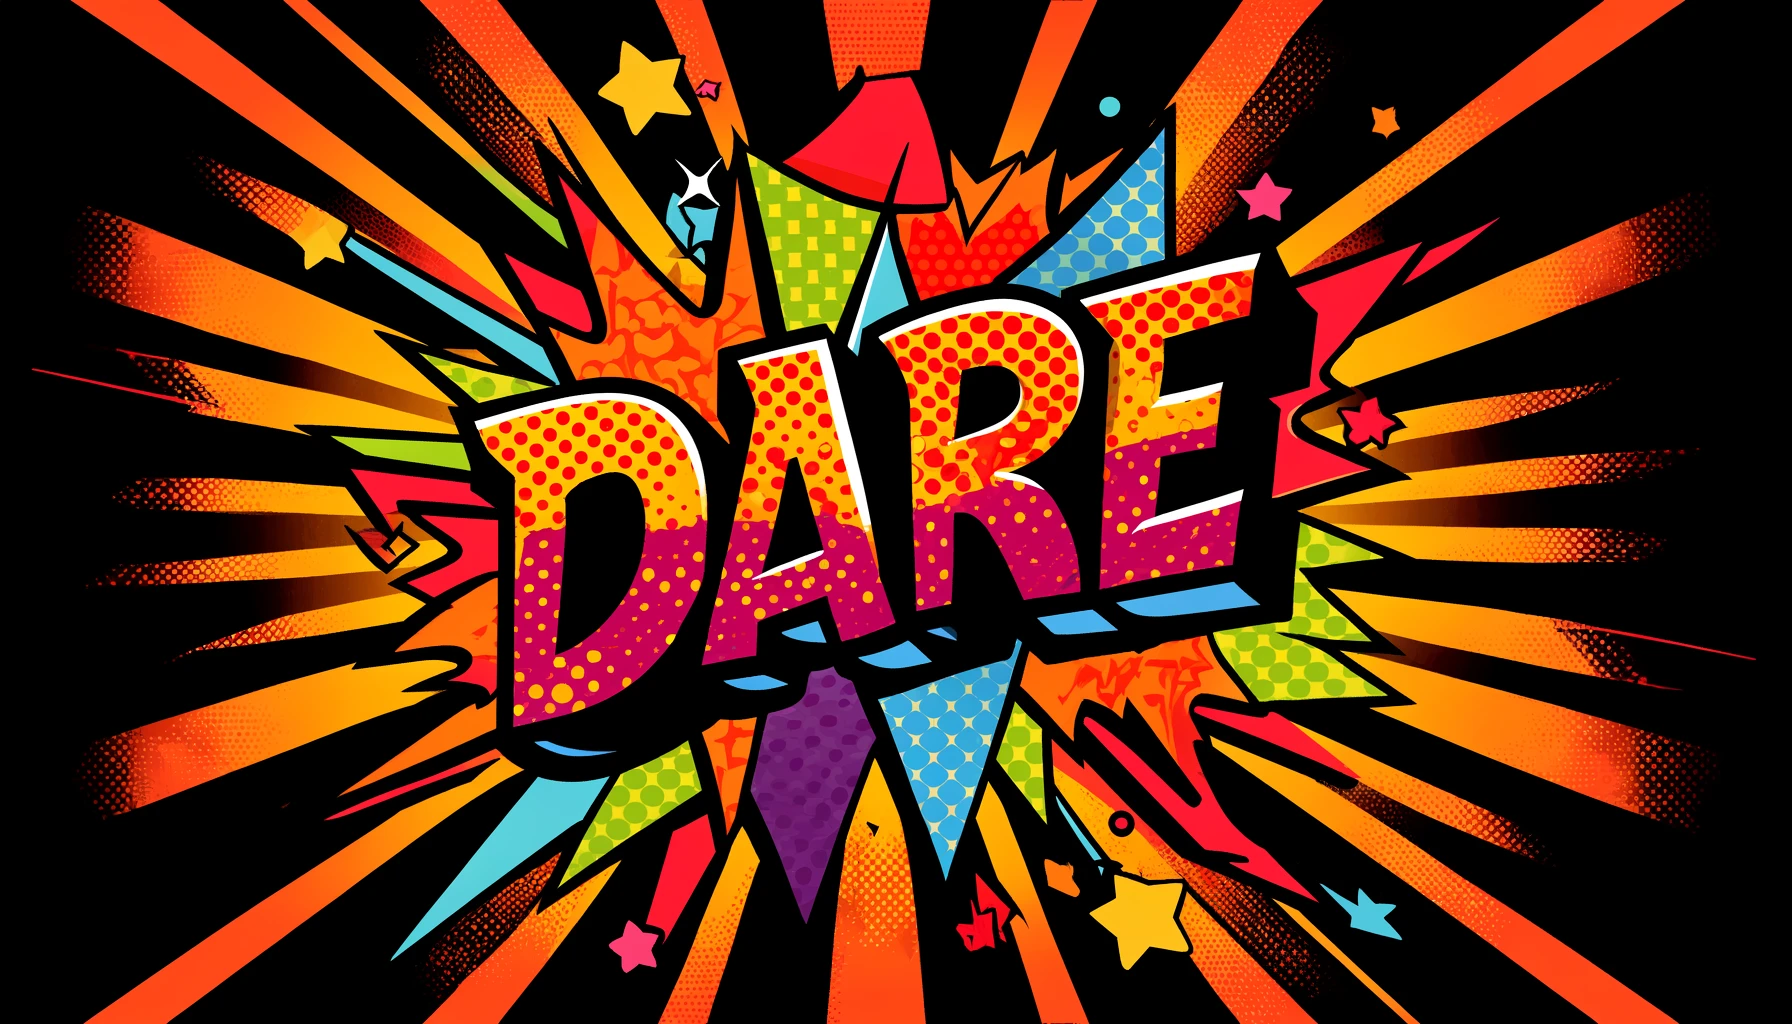 Inspirational Dare Day Greetings for Friends